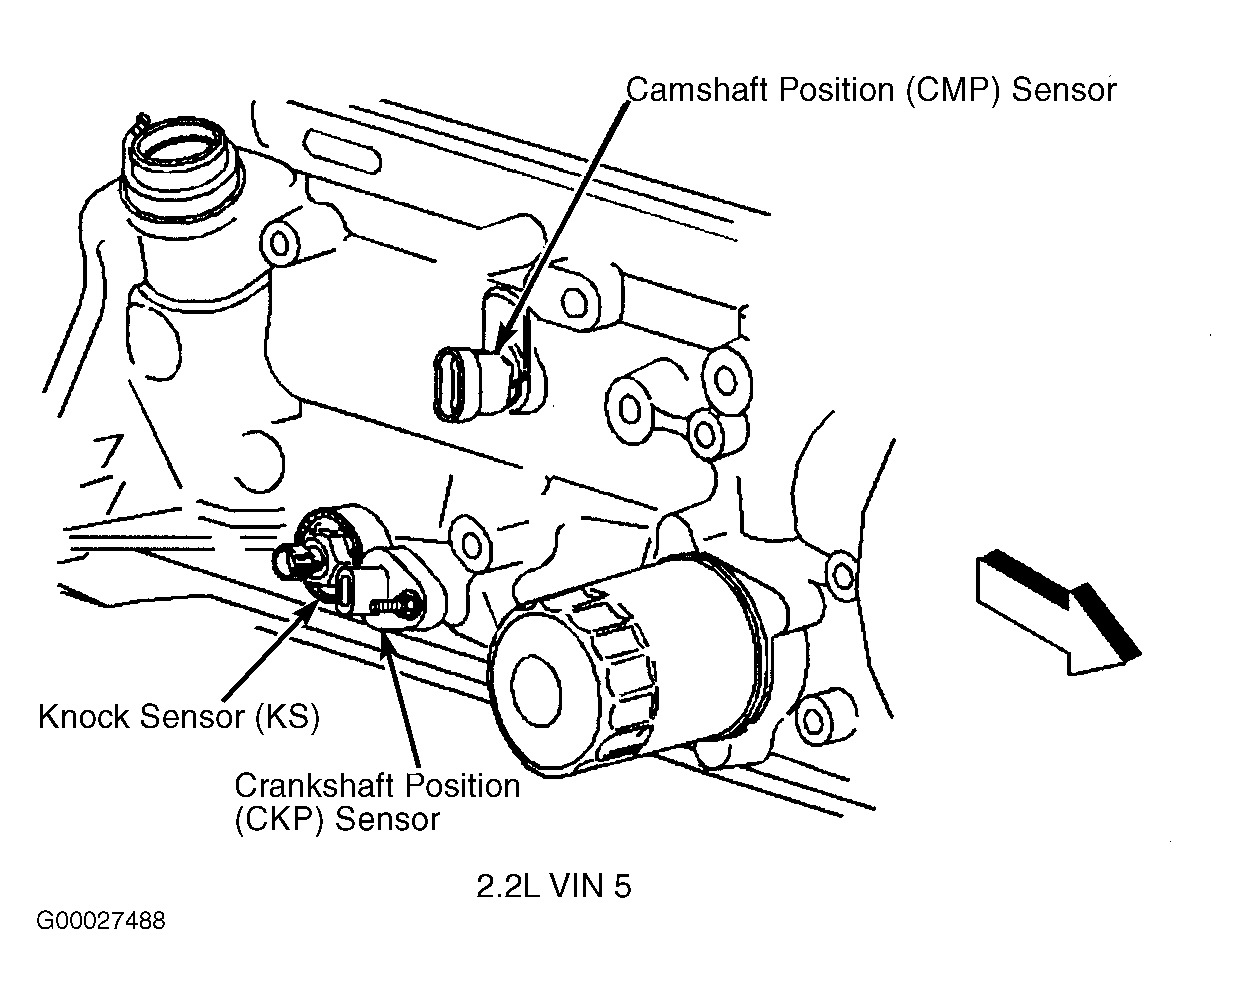 GMC Jimmy 2002 - Component Locations -  Right Side Of Engine (2.2L VIN 5)